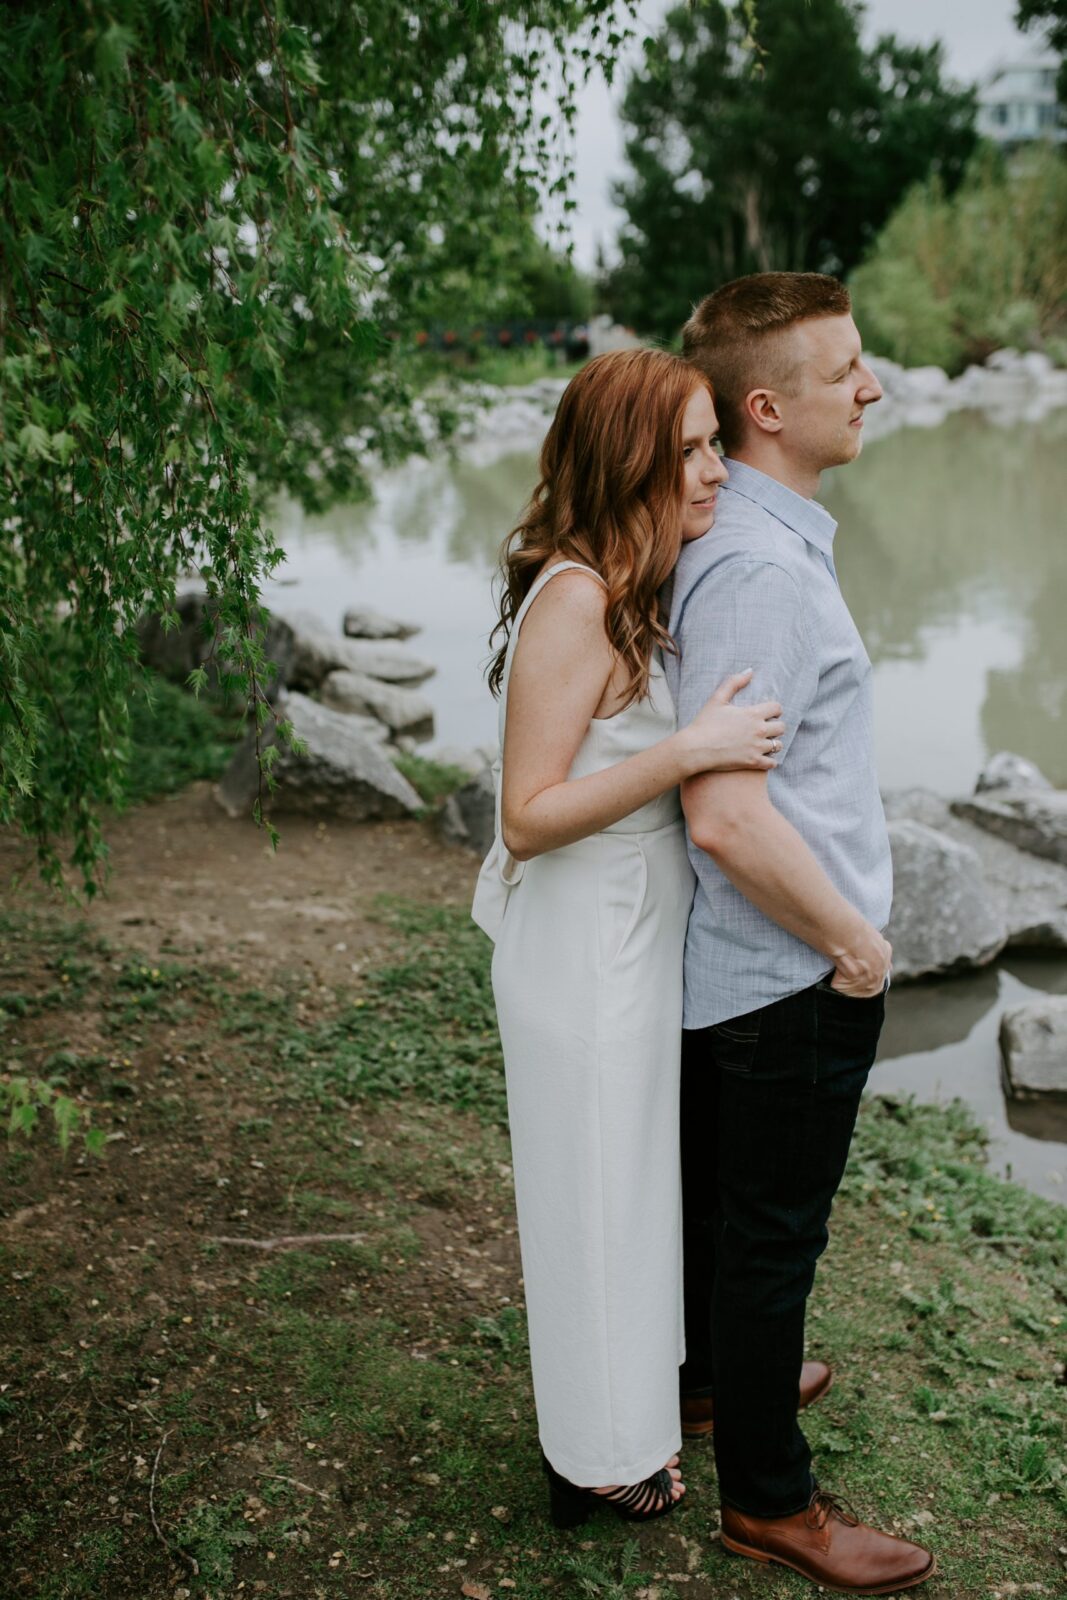 6 Tips All About Choosing Outfits For Your Engagement Session - Deanna Rachel featured on Bronte Bride